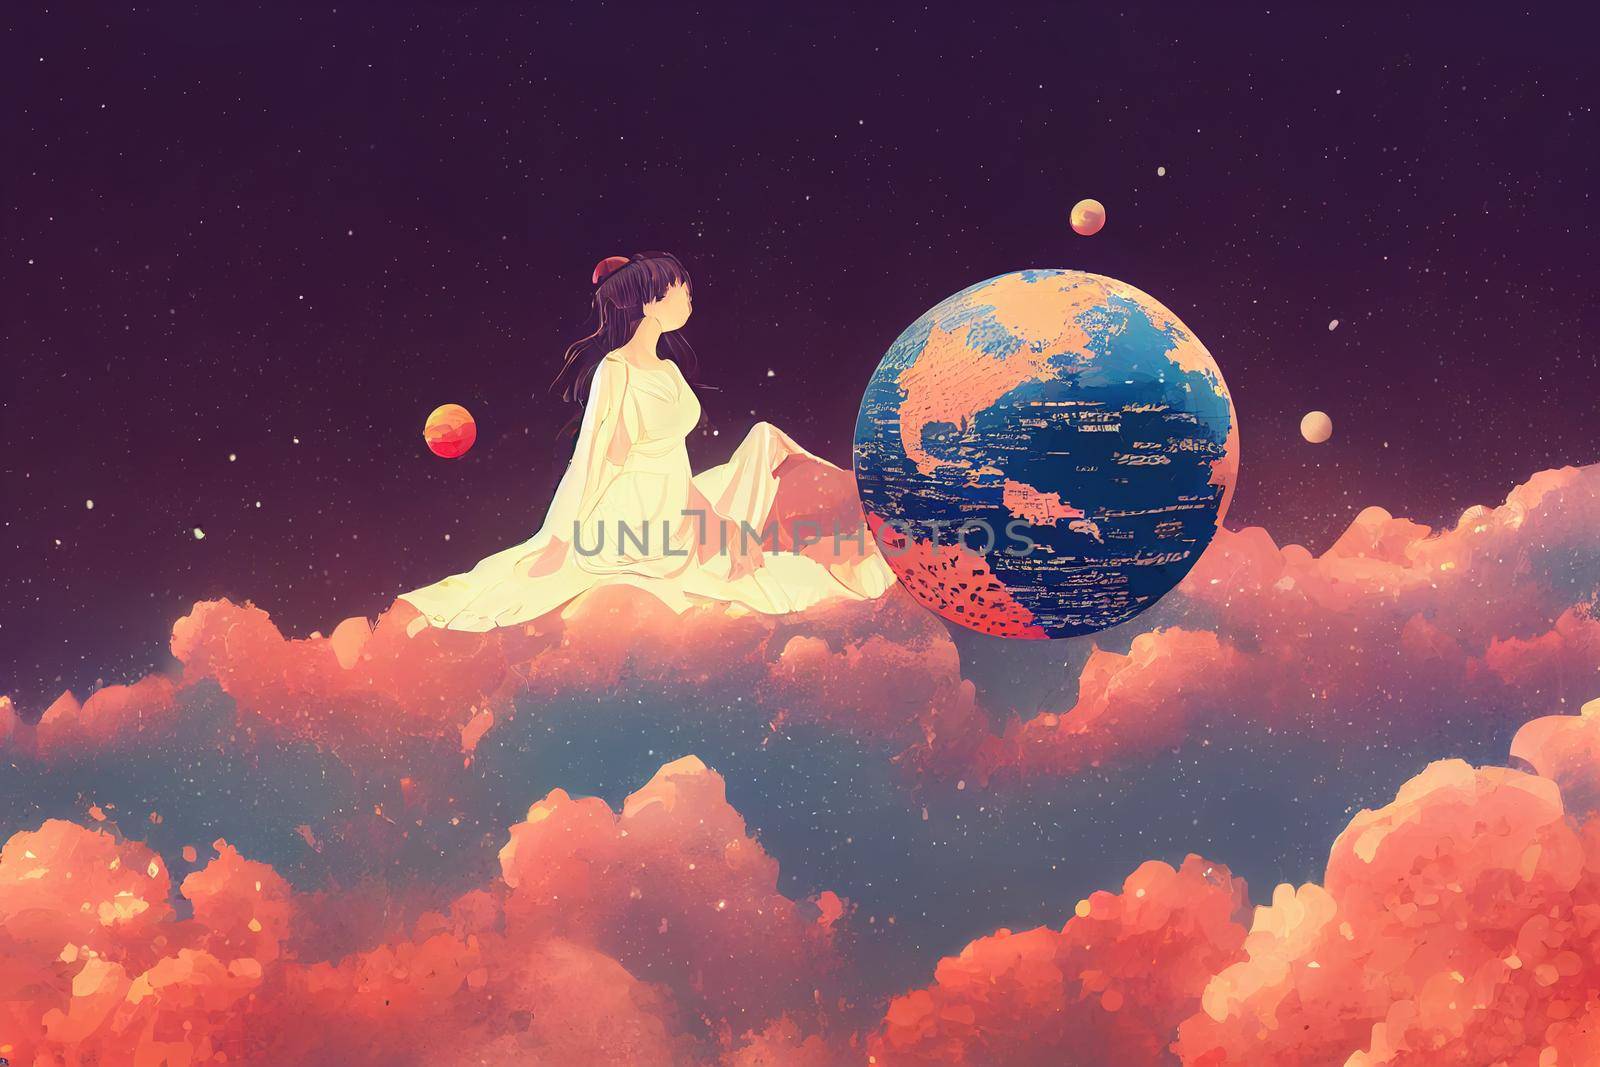 Digital illustration of a woman embracing the globe on space background by 2ragon